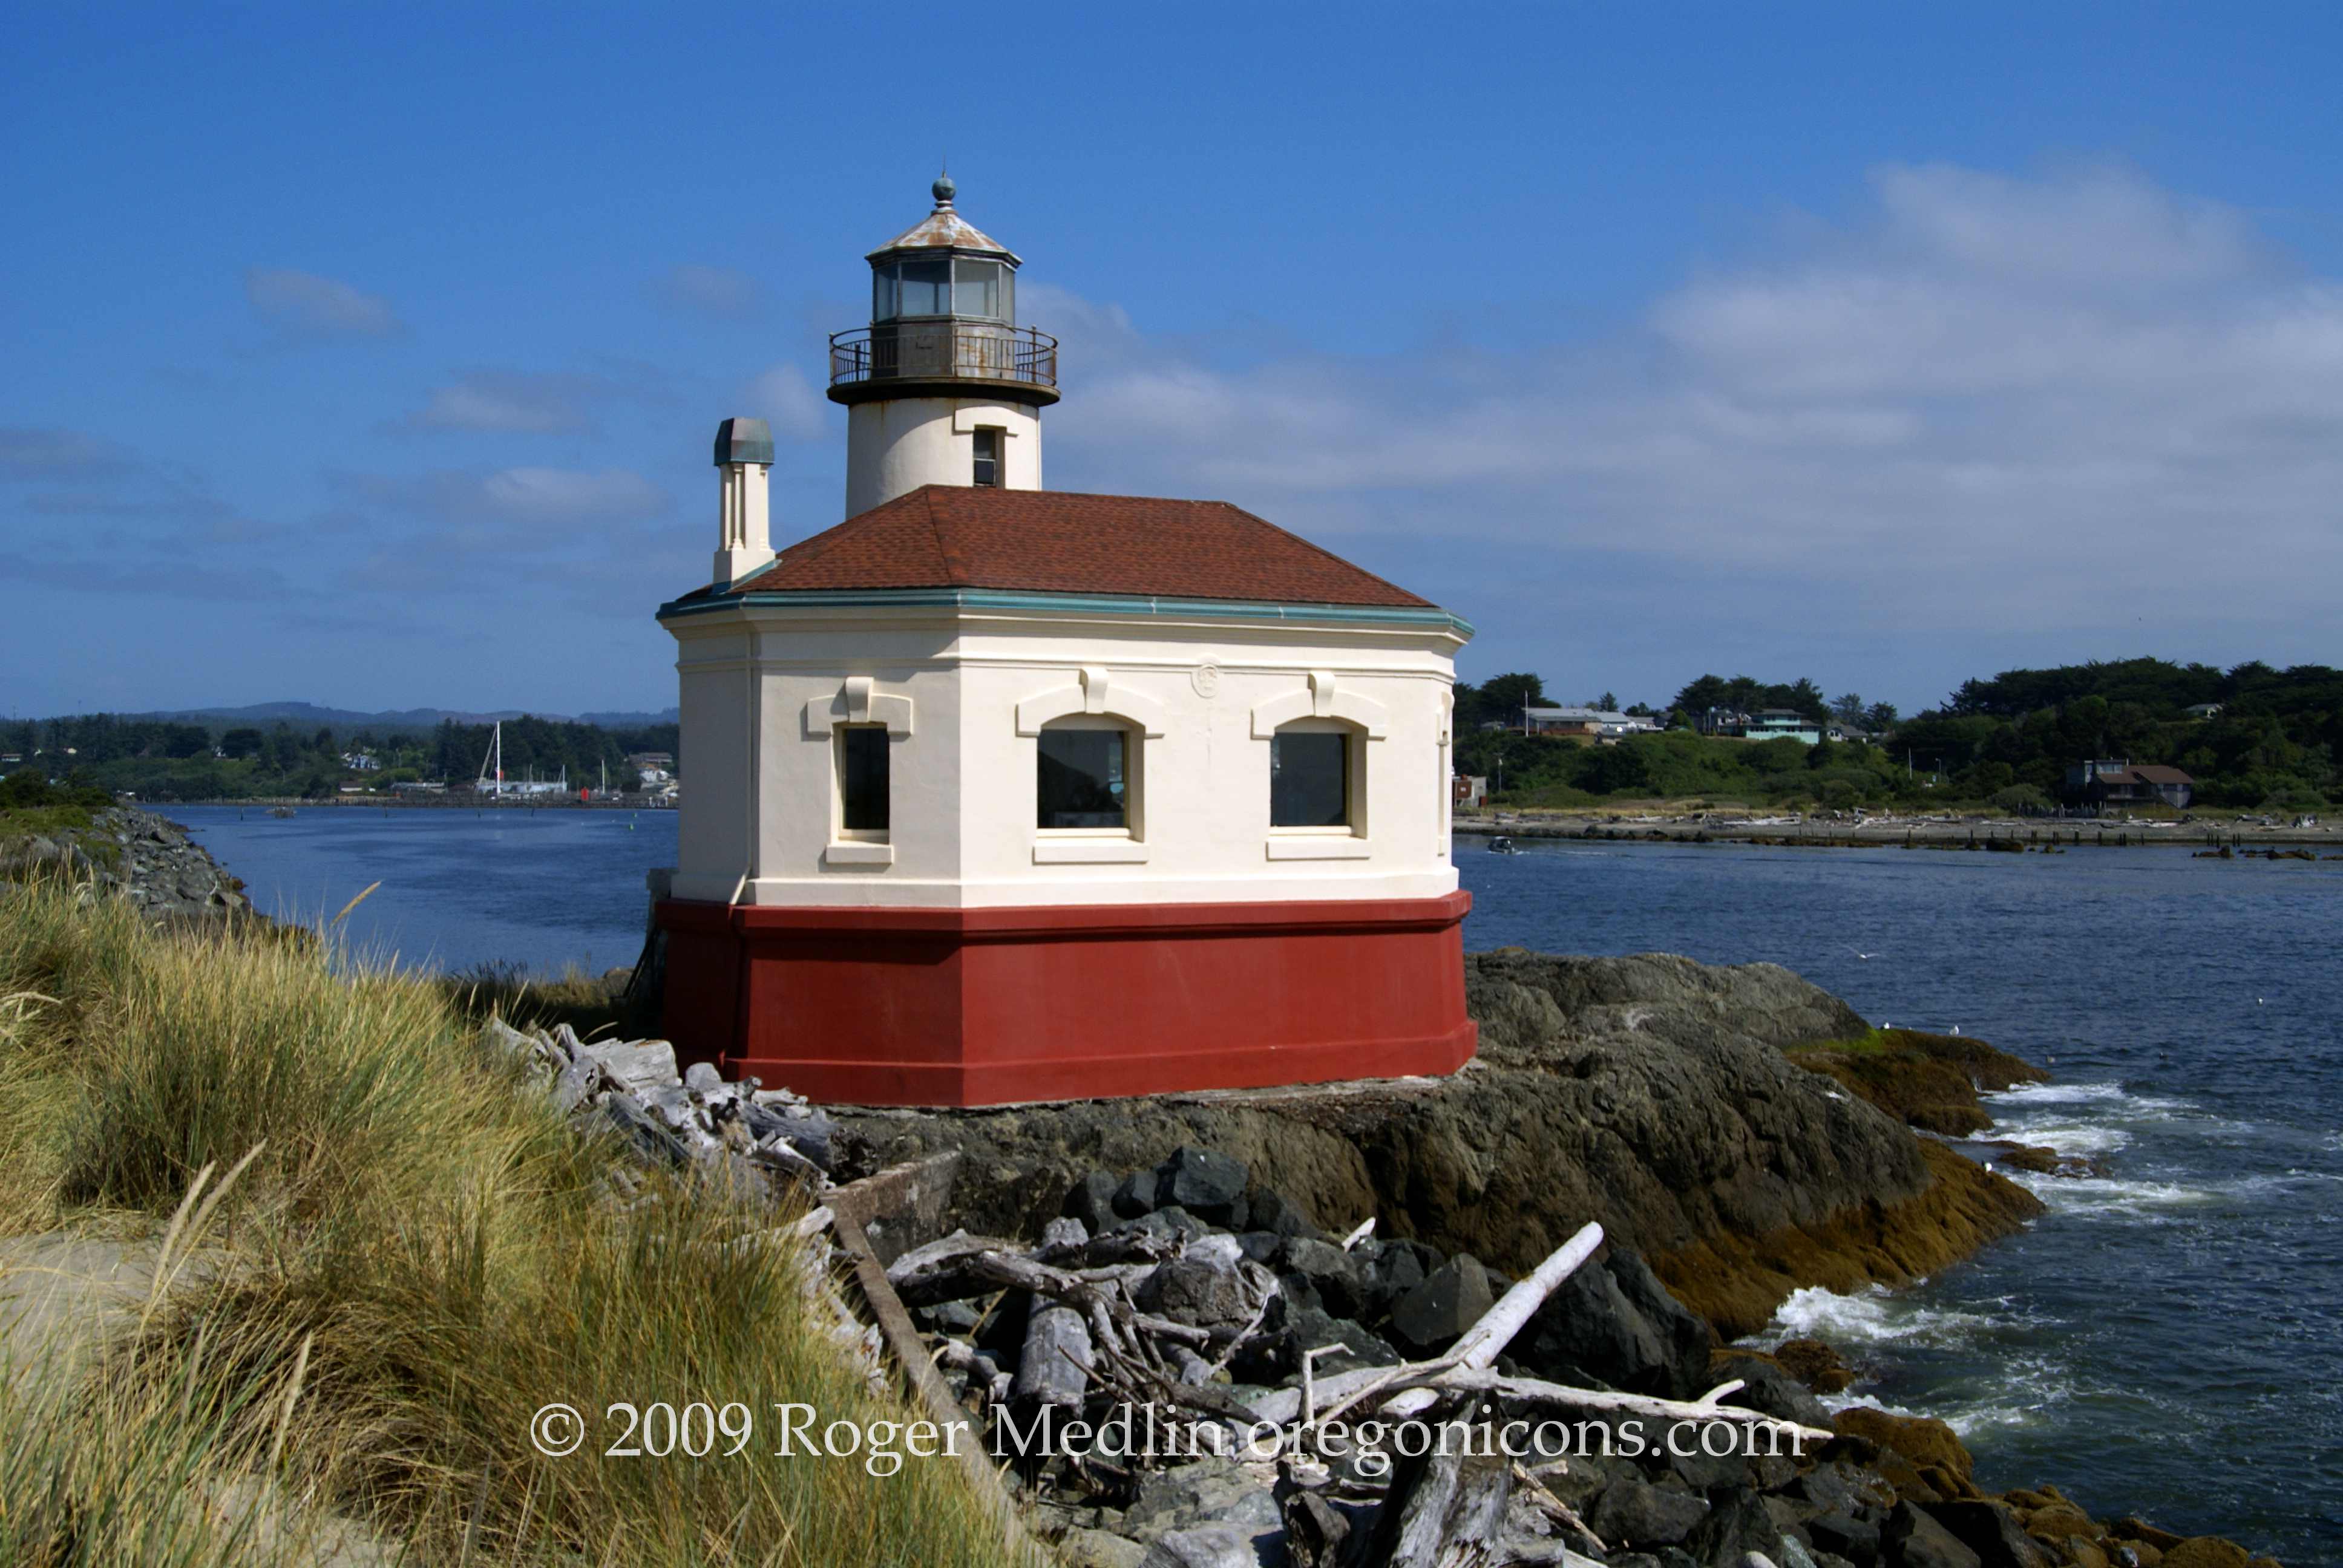 Roger Medlin 2009 Coquille Lighthouse